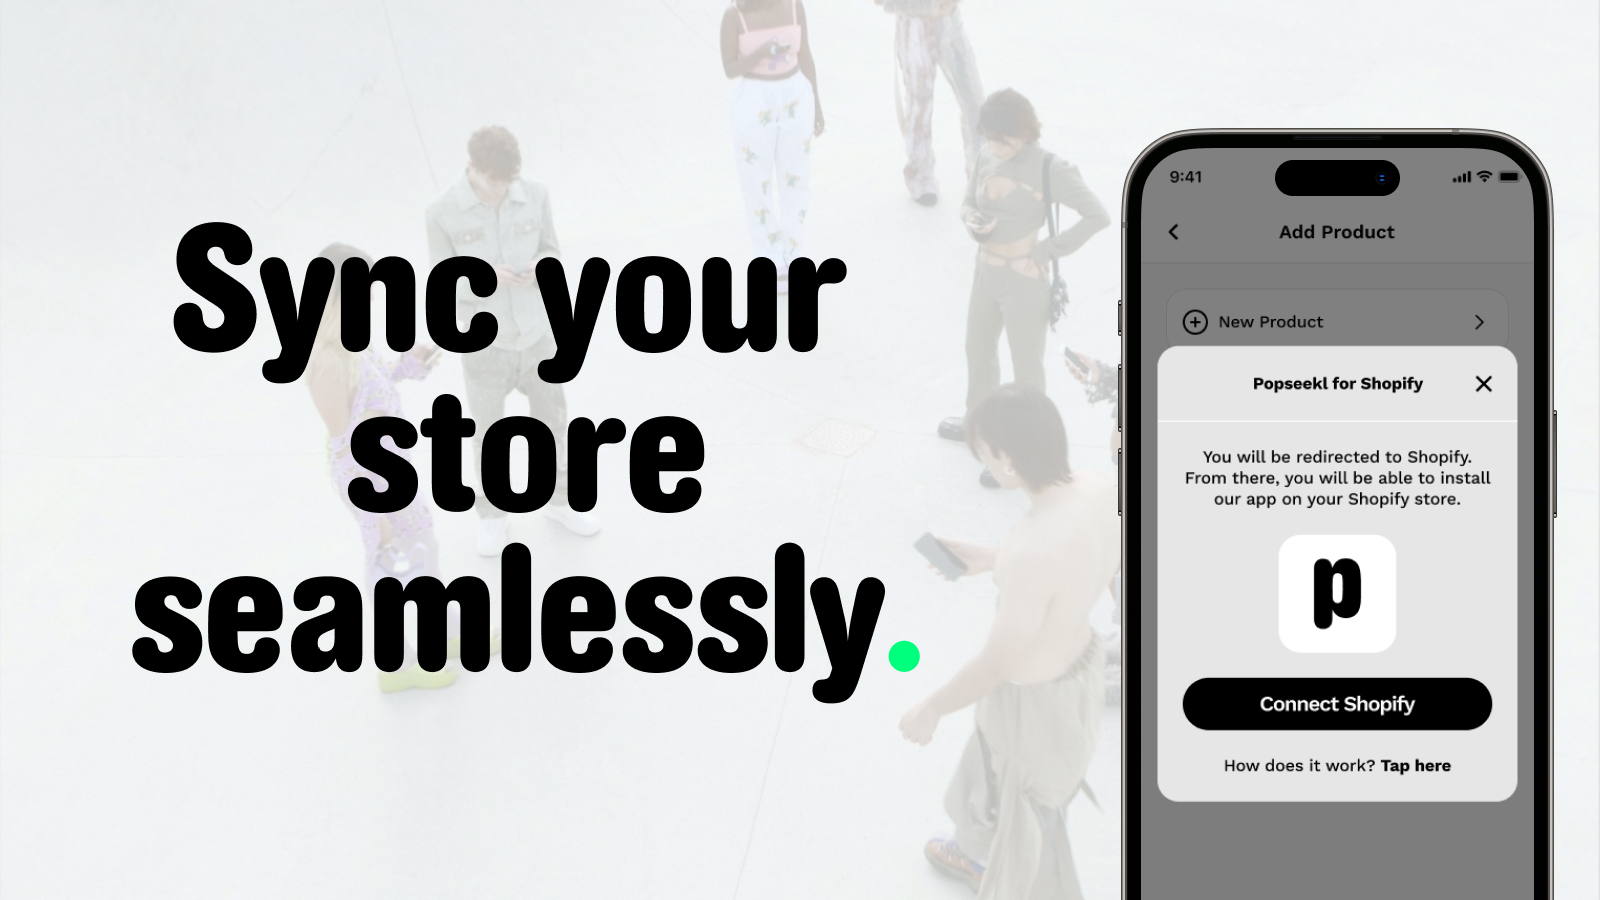 Sync your store seamlessly